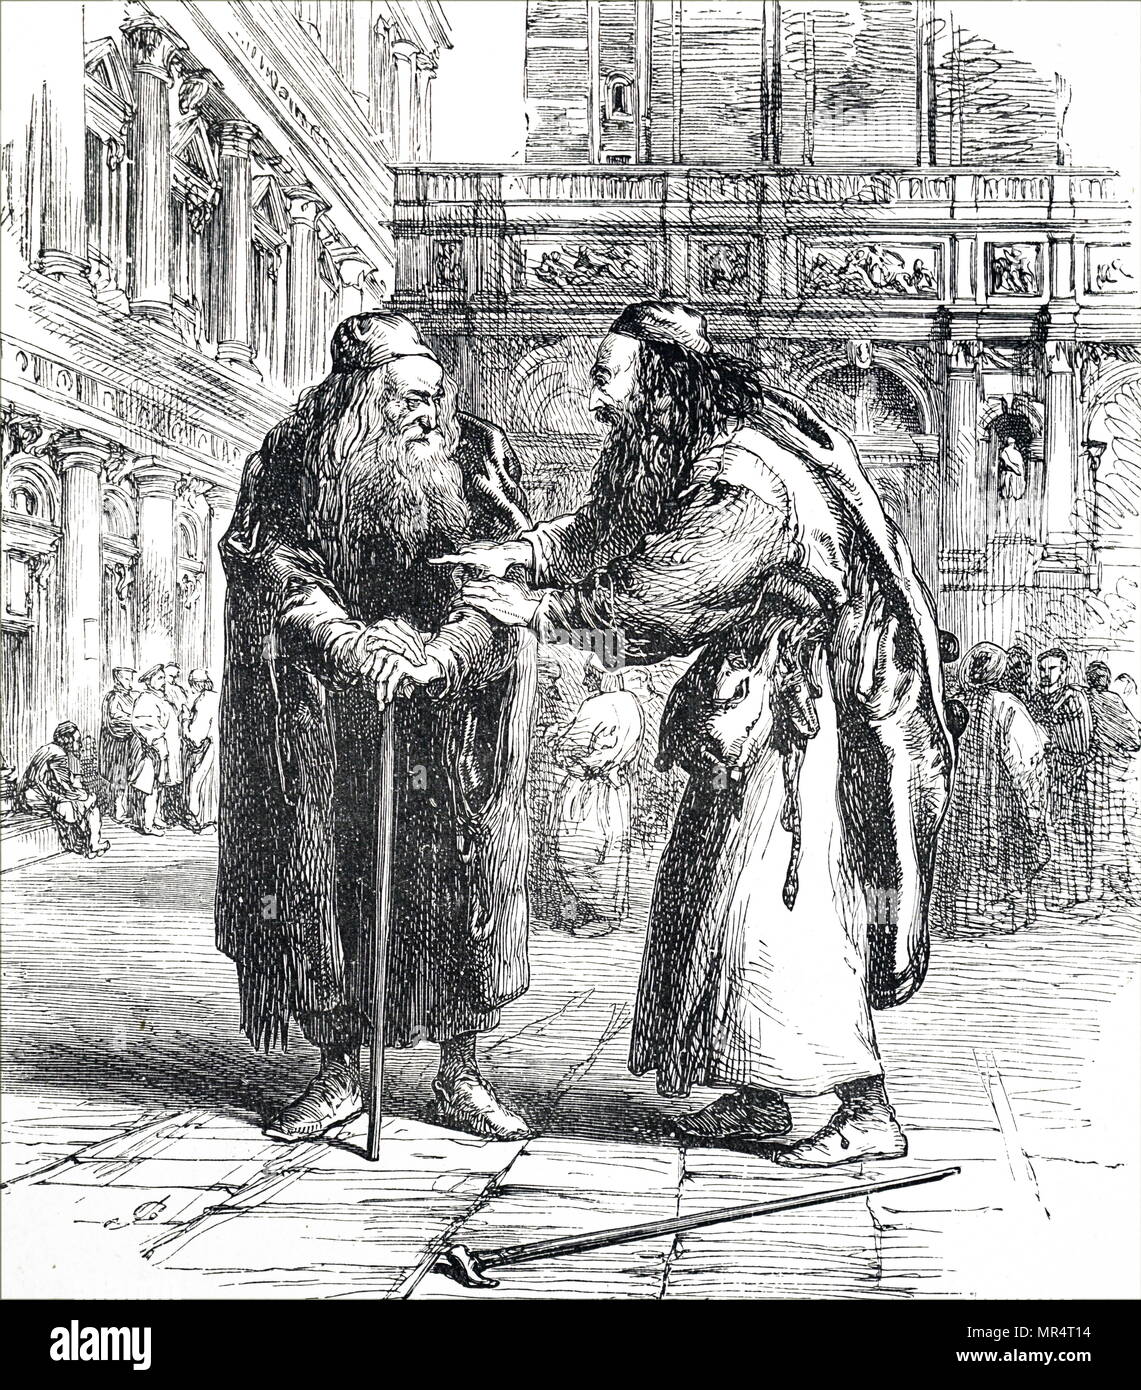 Engraving depicting a scene from William Shakespeare's The Merchant of Venice. Shylock (right) is seen learning from Tubal that Antonio is in financial difficulties, and that there is a chance that he can enforce his contract for repayment with 'a pound of flesh'. William Shakespeare (1564-1616) an English poet, playwright and actor. Dated 19th century Stock Photo